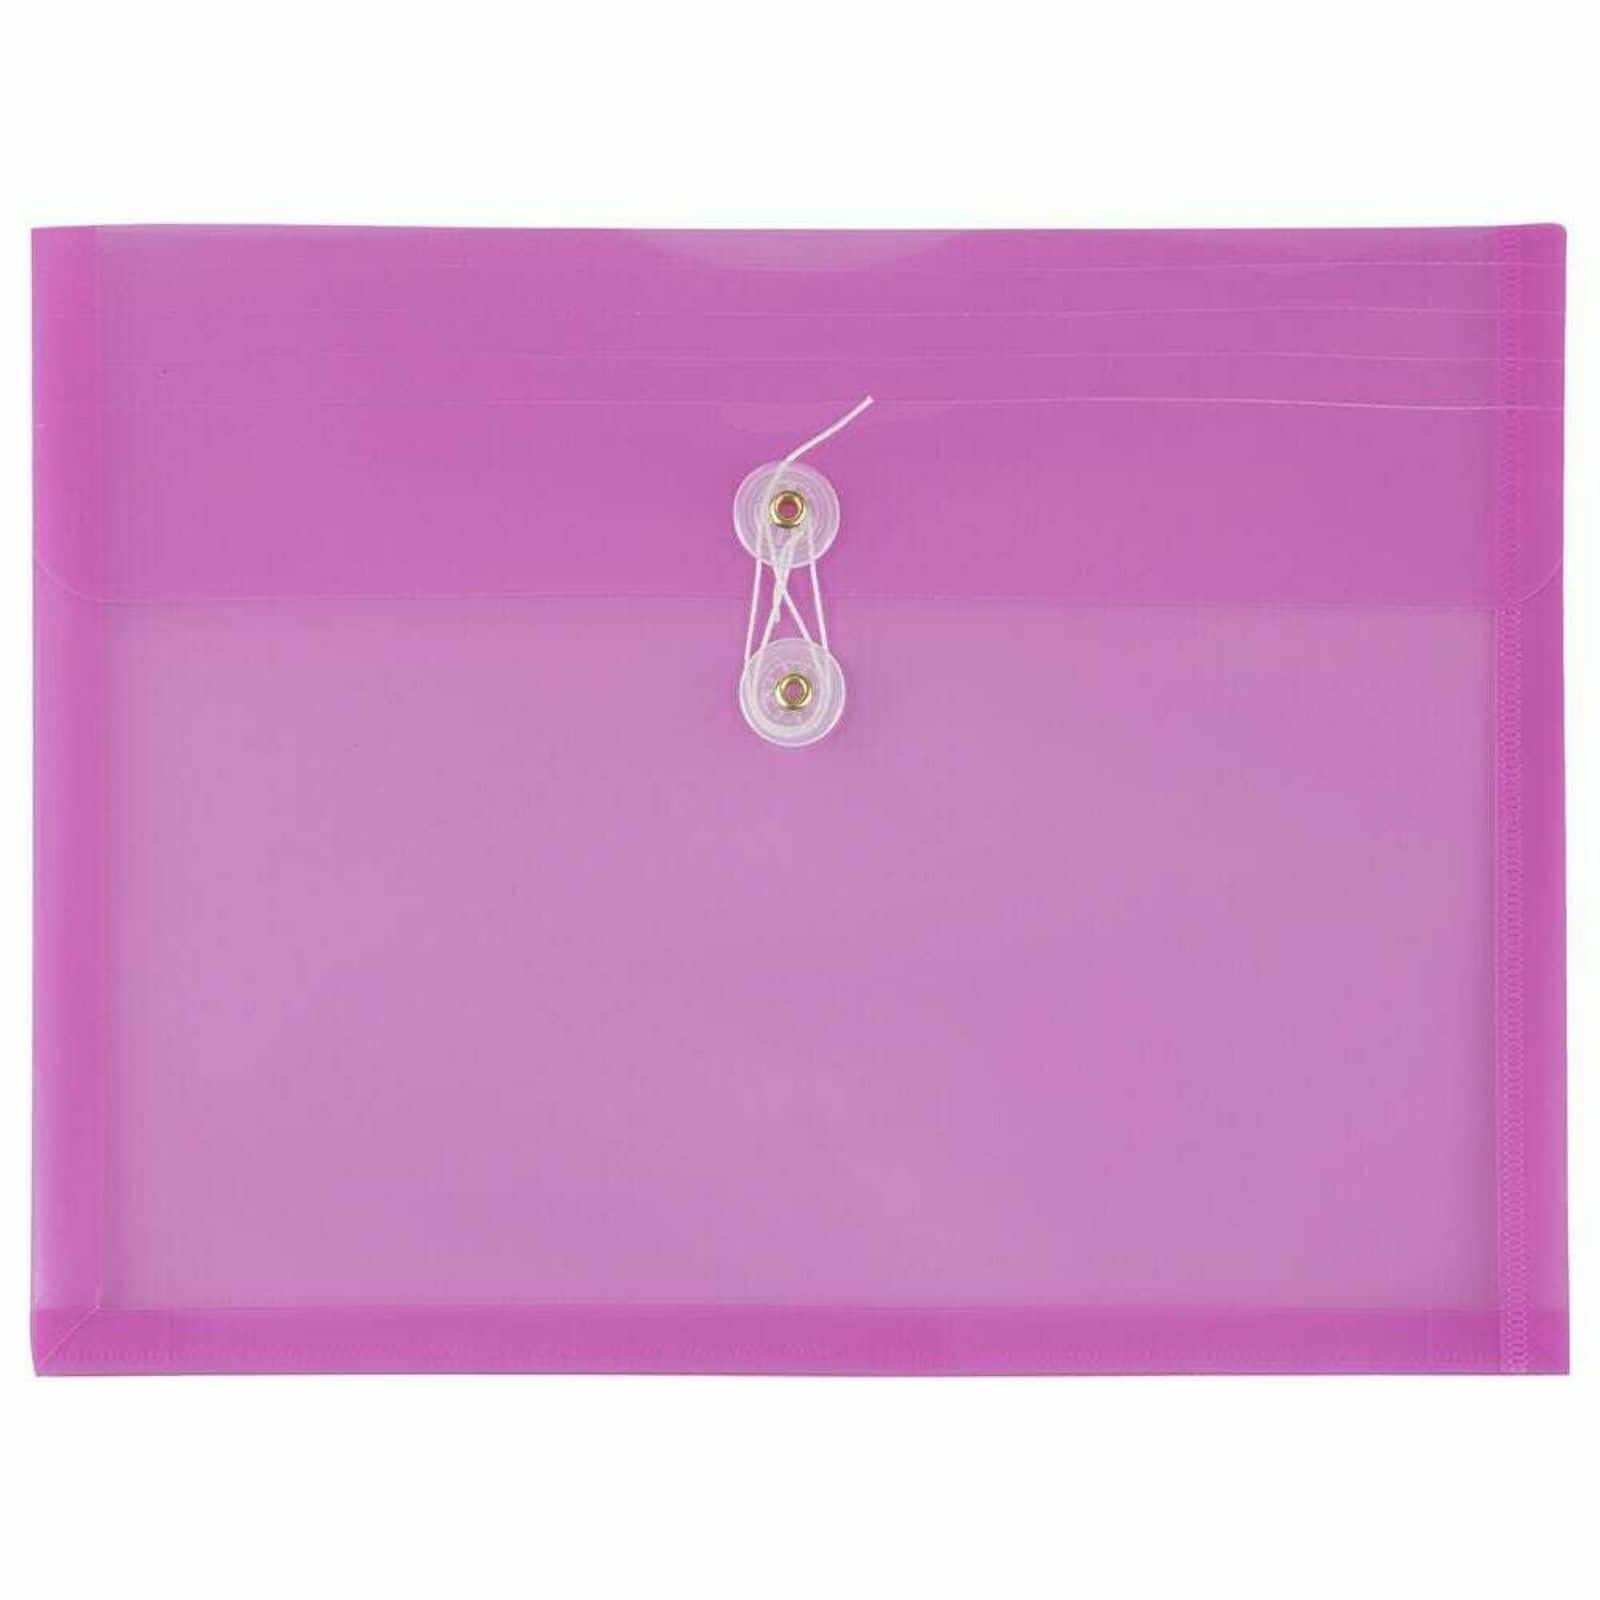 JAM Paper Booklet Plastic Envelopes with Button and String Closure, 108ct.